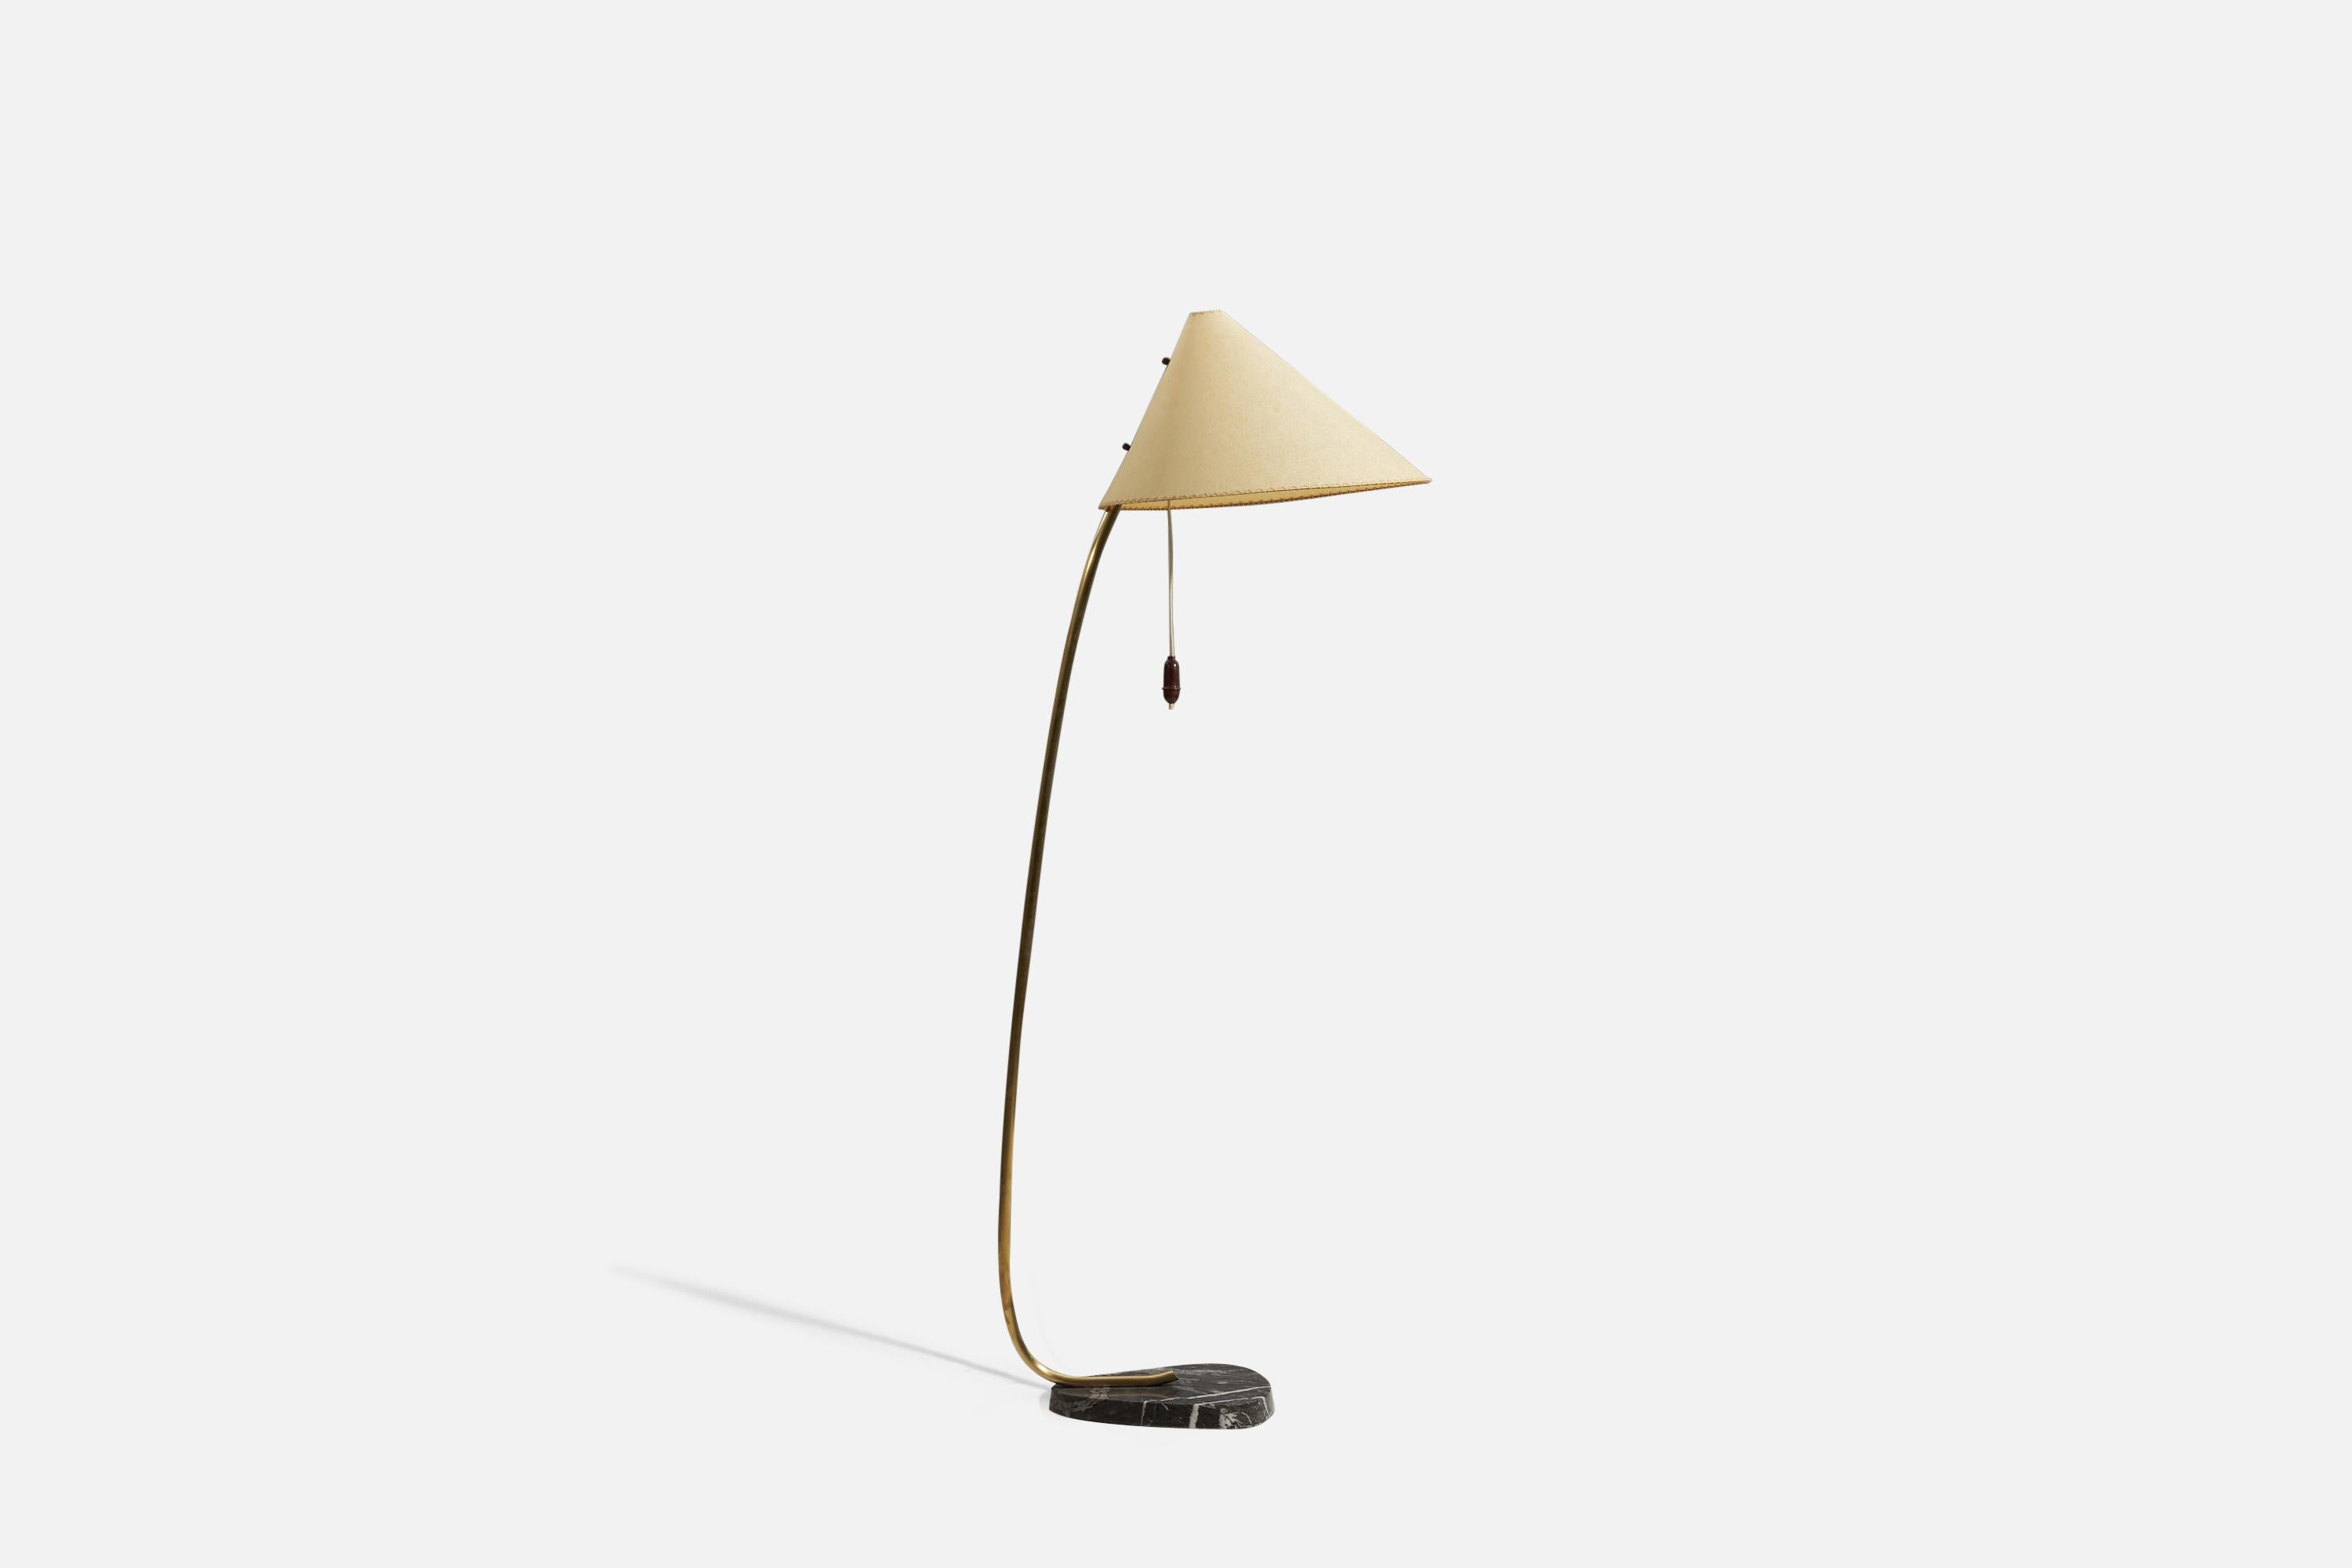 A floor lamp designed and produced in Austria, c. 1950s. The lamp features a marble base, brass stem, and paper shade. Lampshade recently recovered.